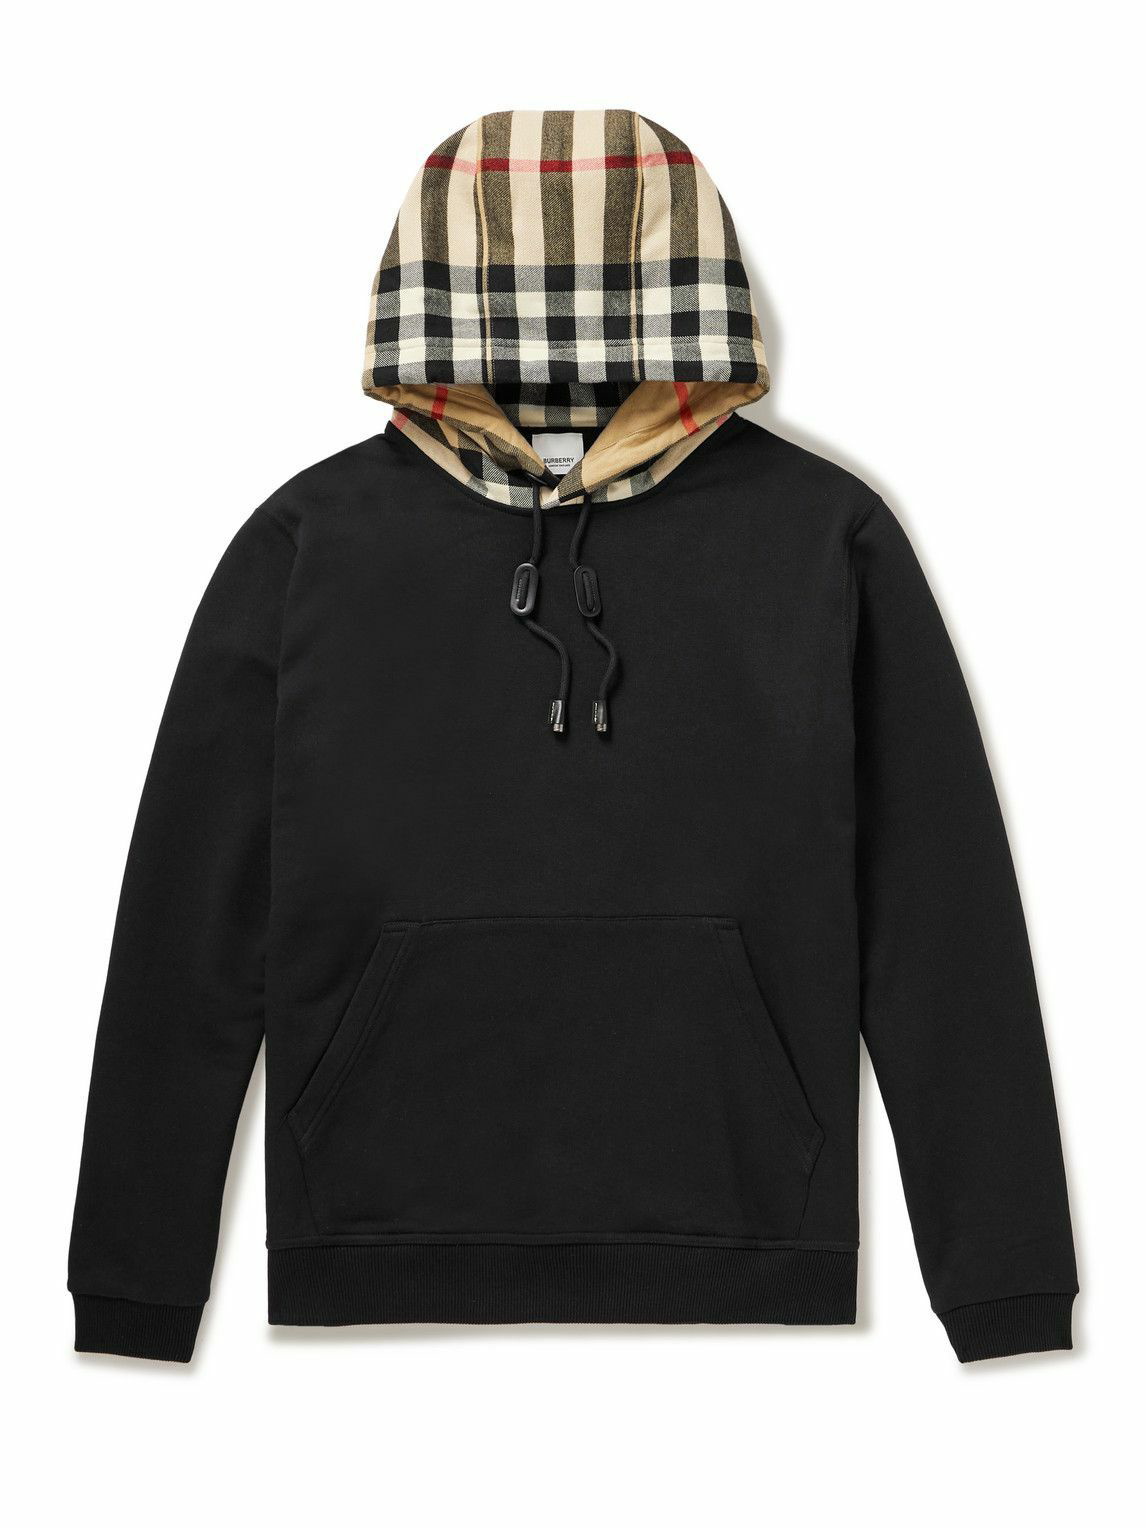 Burberry - Checked Cotton-Jersey Hoodie - Black Burberry